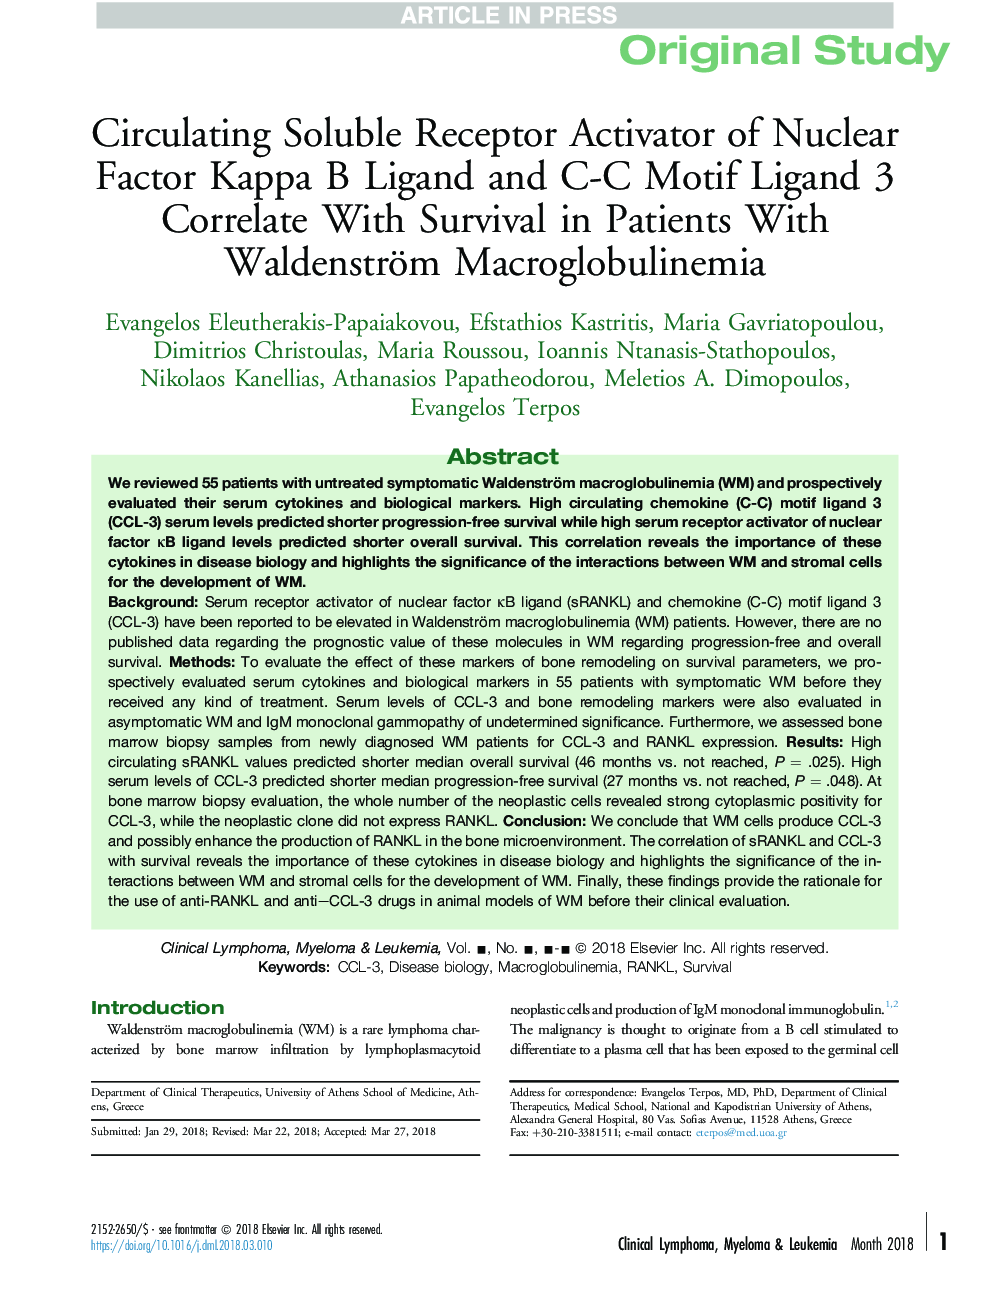 Circulating Soluble Receptor Activator of Nuclear Factor Kappa B Ligand and C-C Motif Ligand 3 Correlate With Survival in Patients With Waldenström Macroglobulinemia